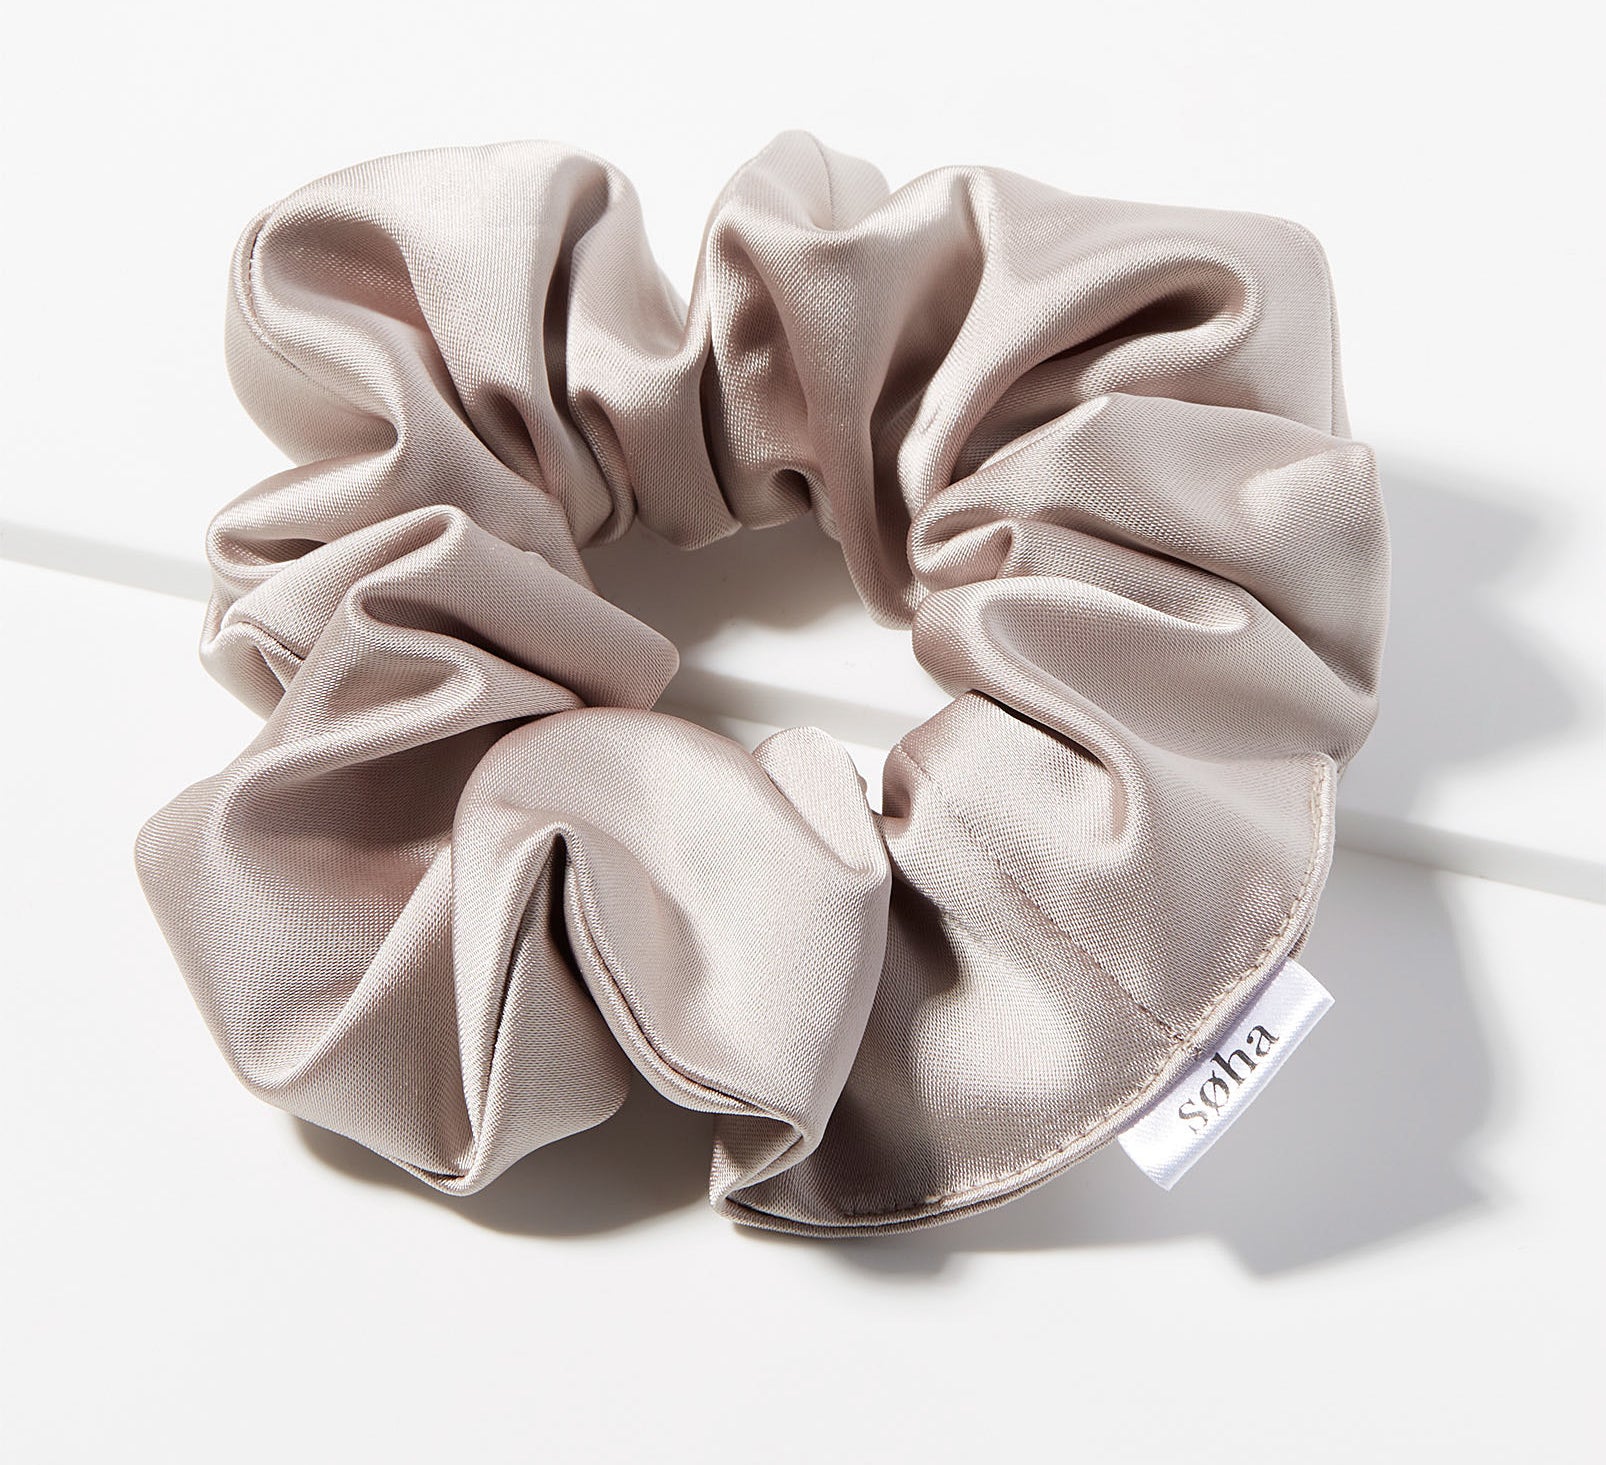 A large scrunchie on a blank background